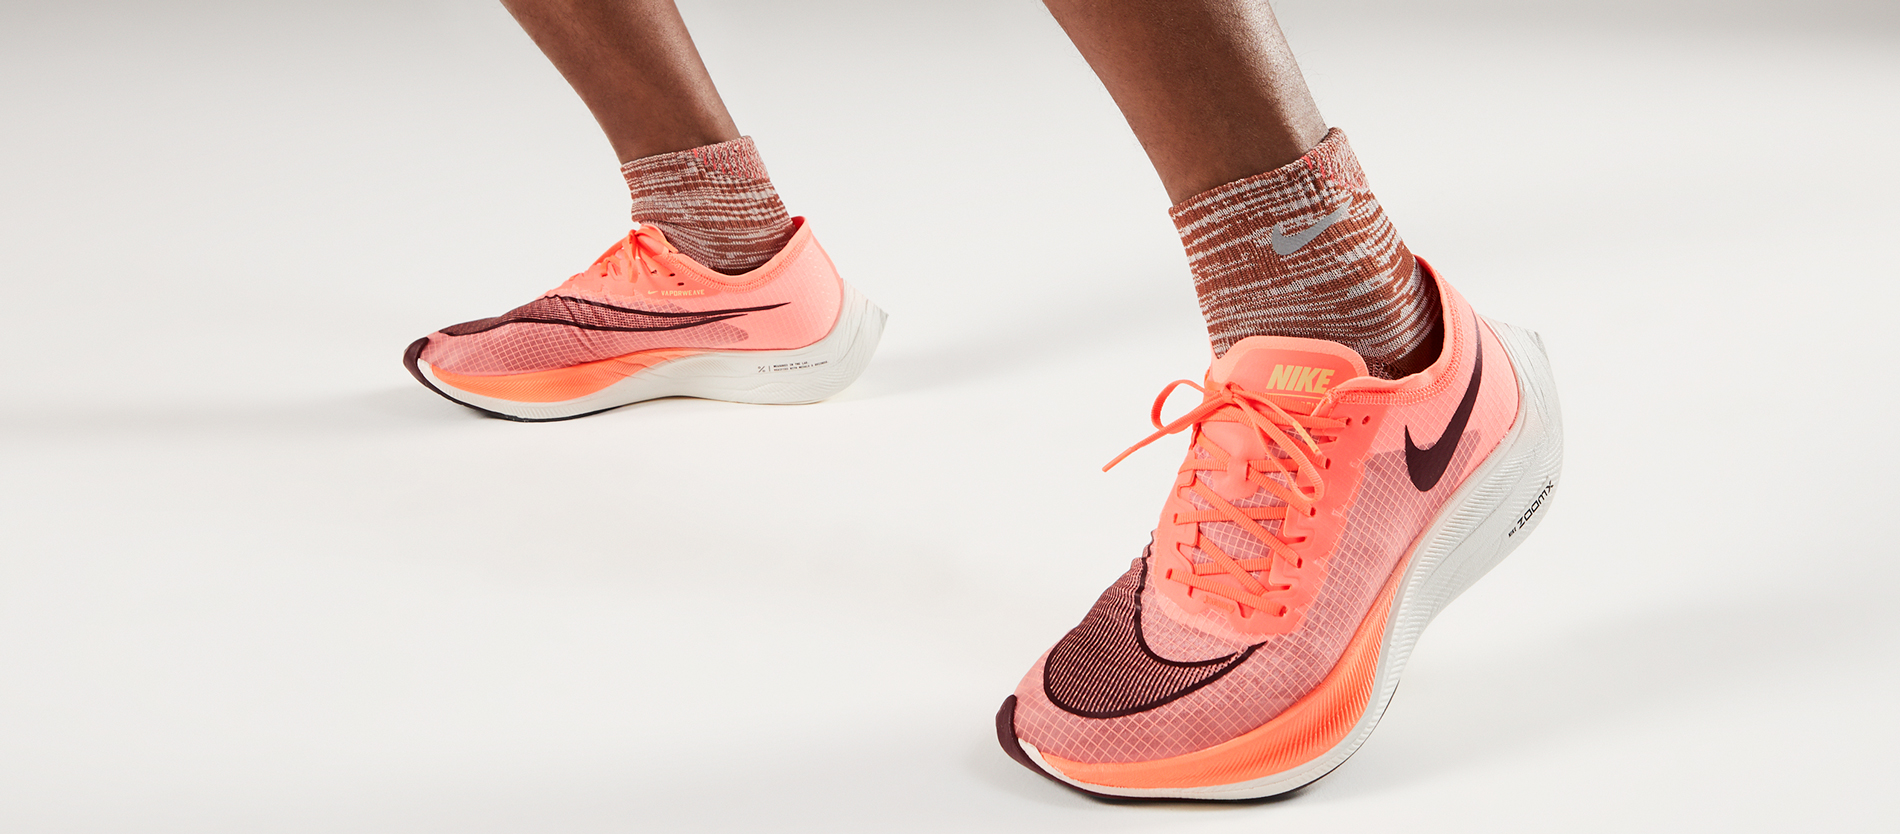 How To Prevent Running Injuries | Kintec: Footwear + Orthotics